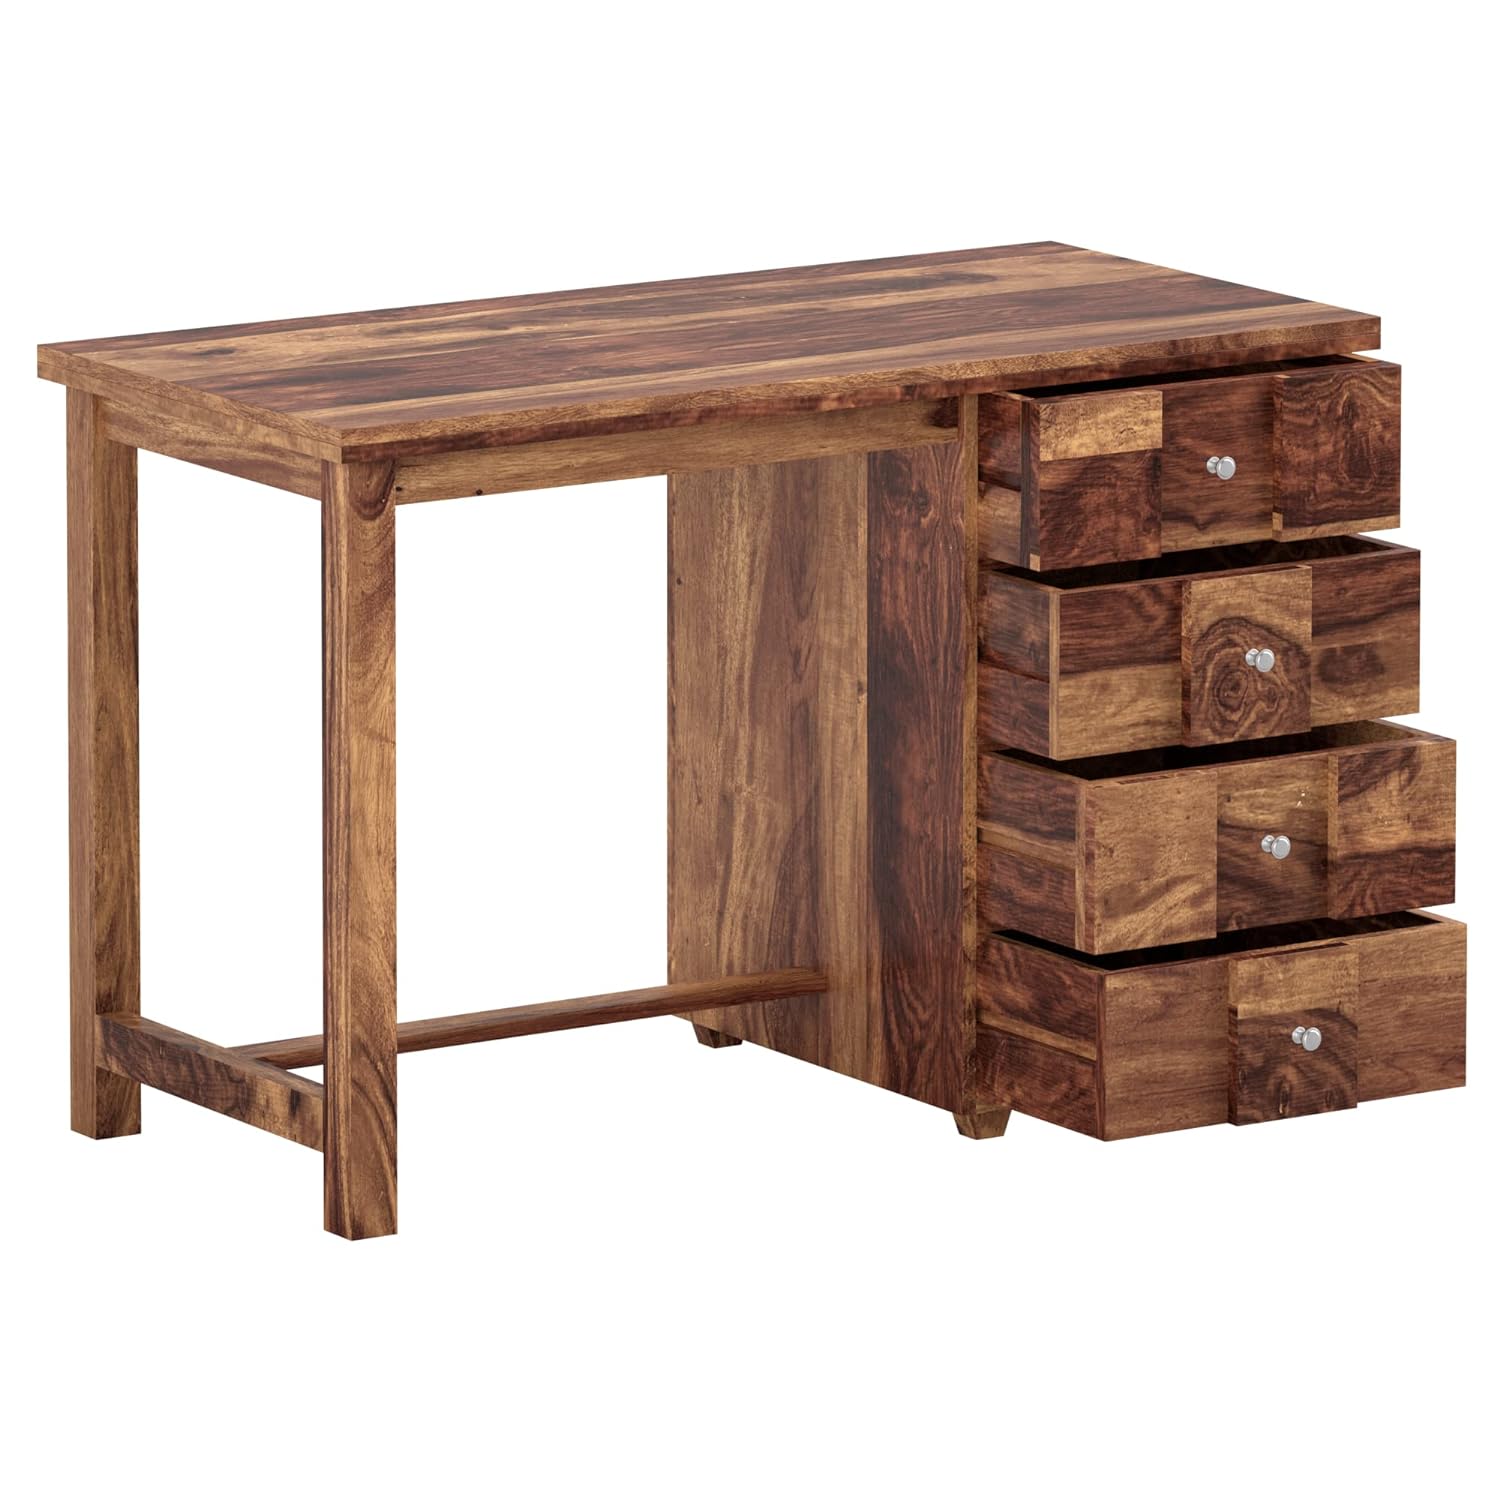 Solid Sheesham Wood Carpre Computer Table with 4 Drawers